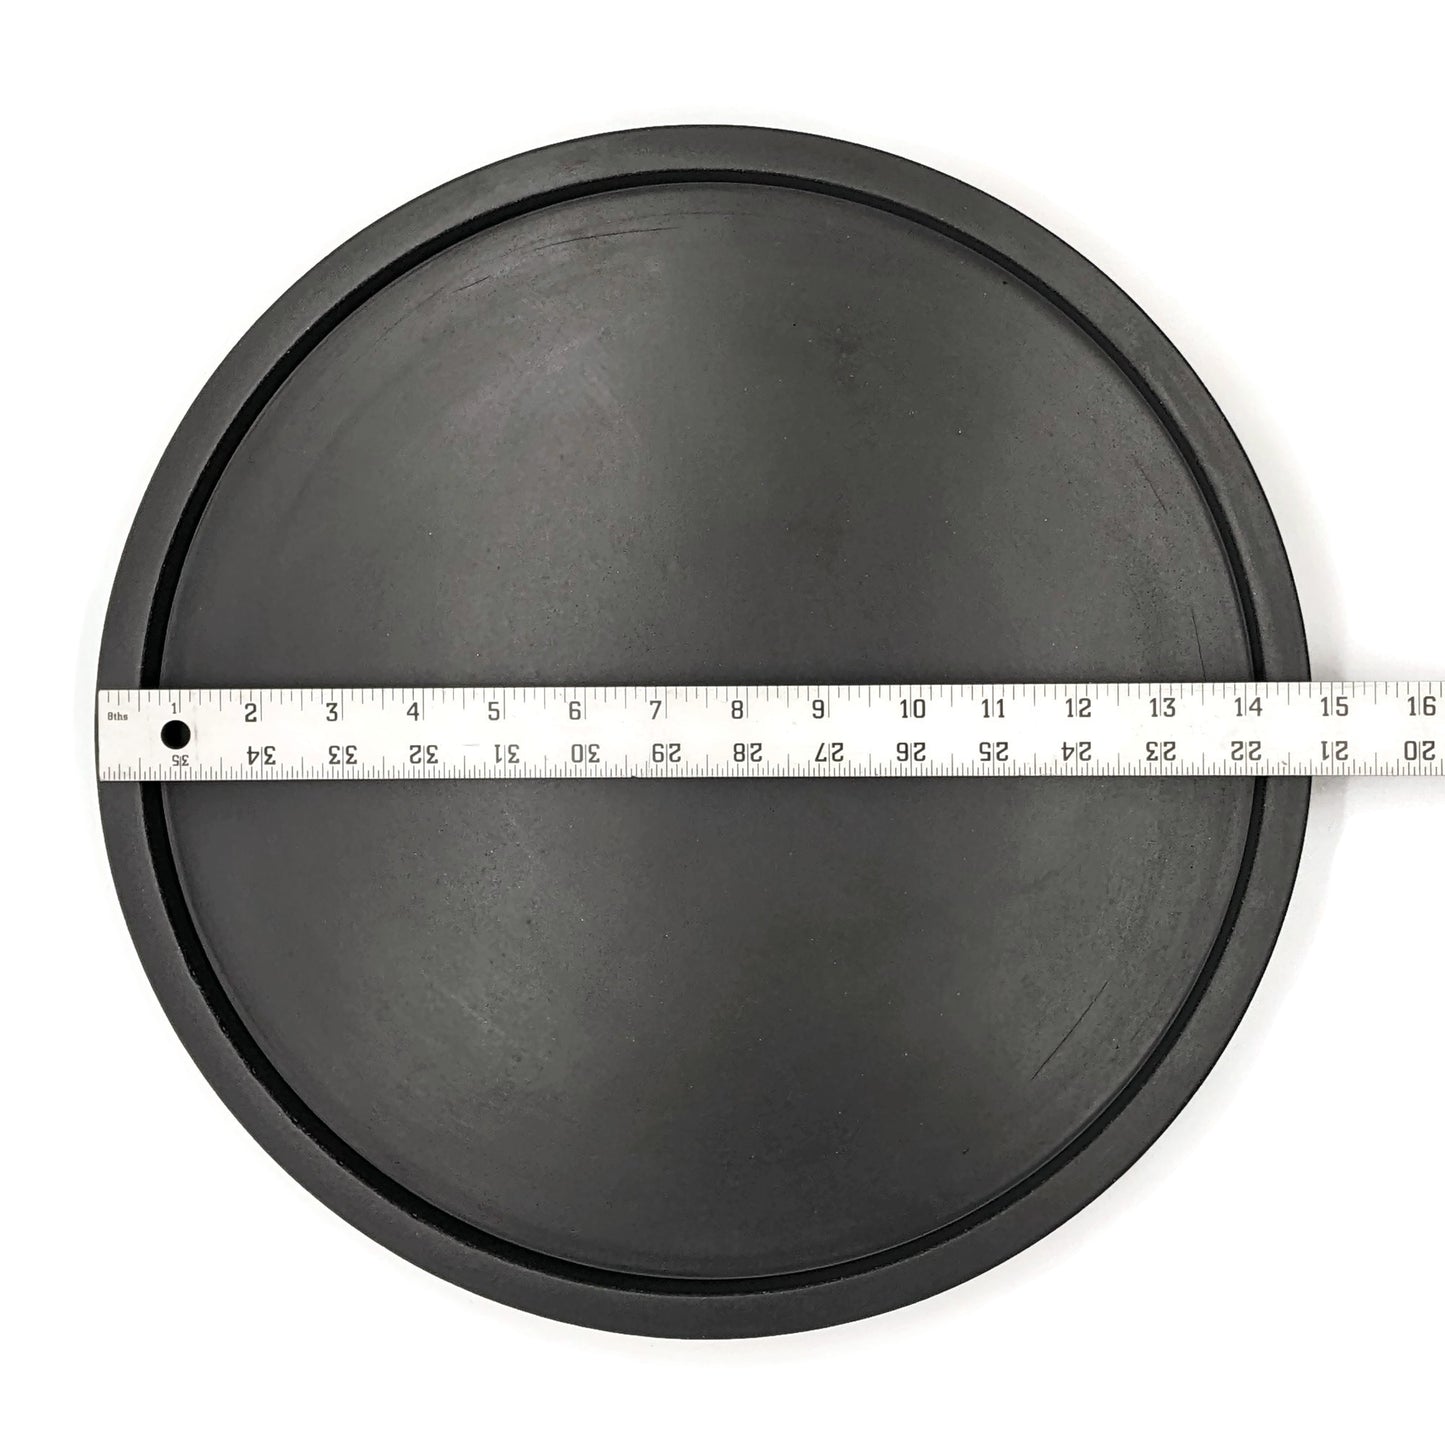 Black 15 Inch Concrete Lazy Susan with ruler for dimensions